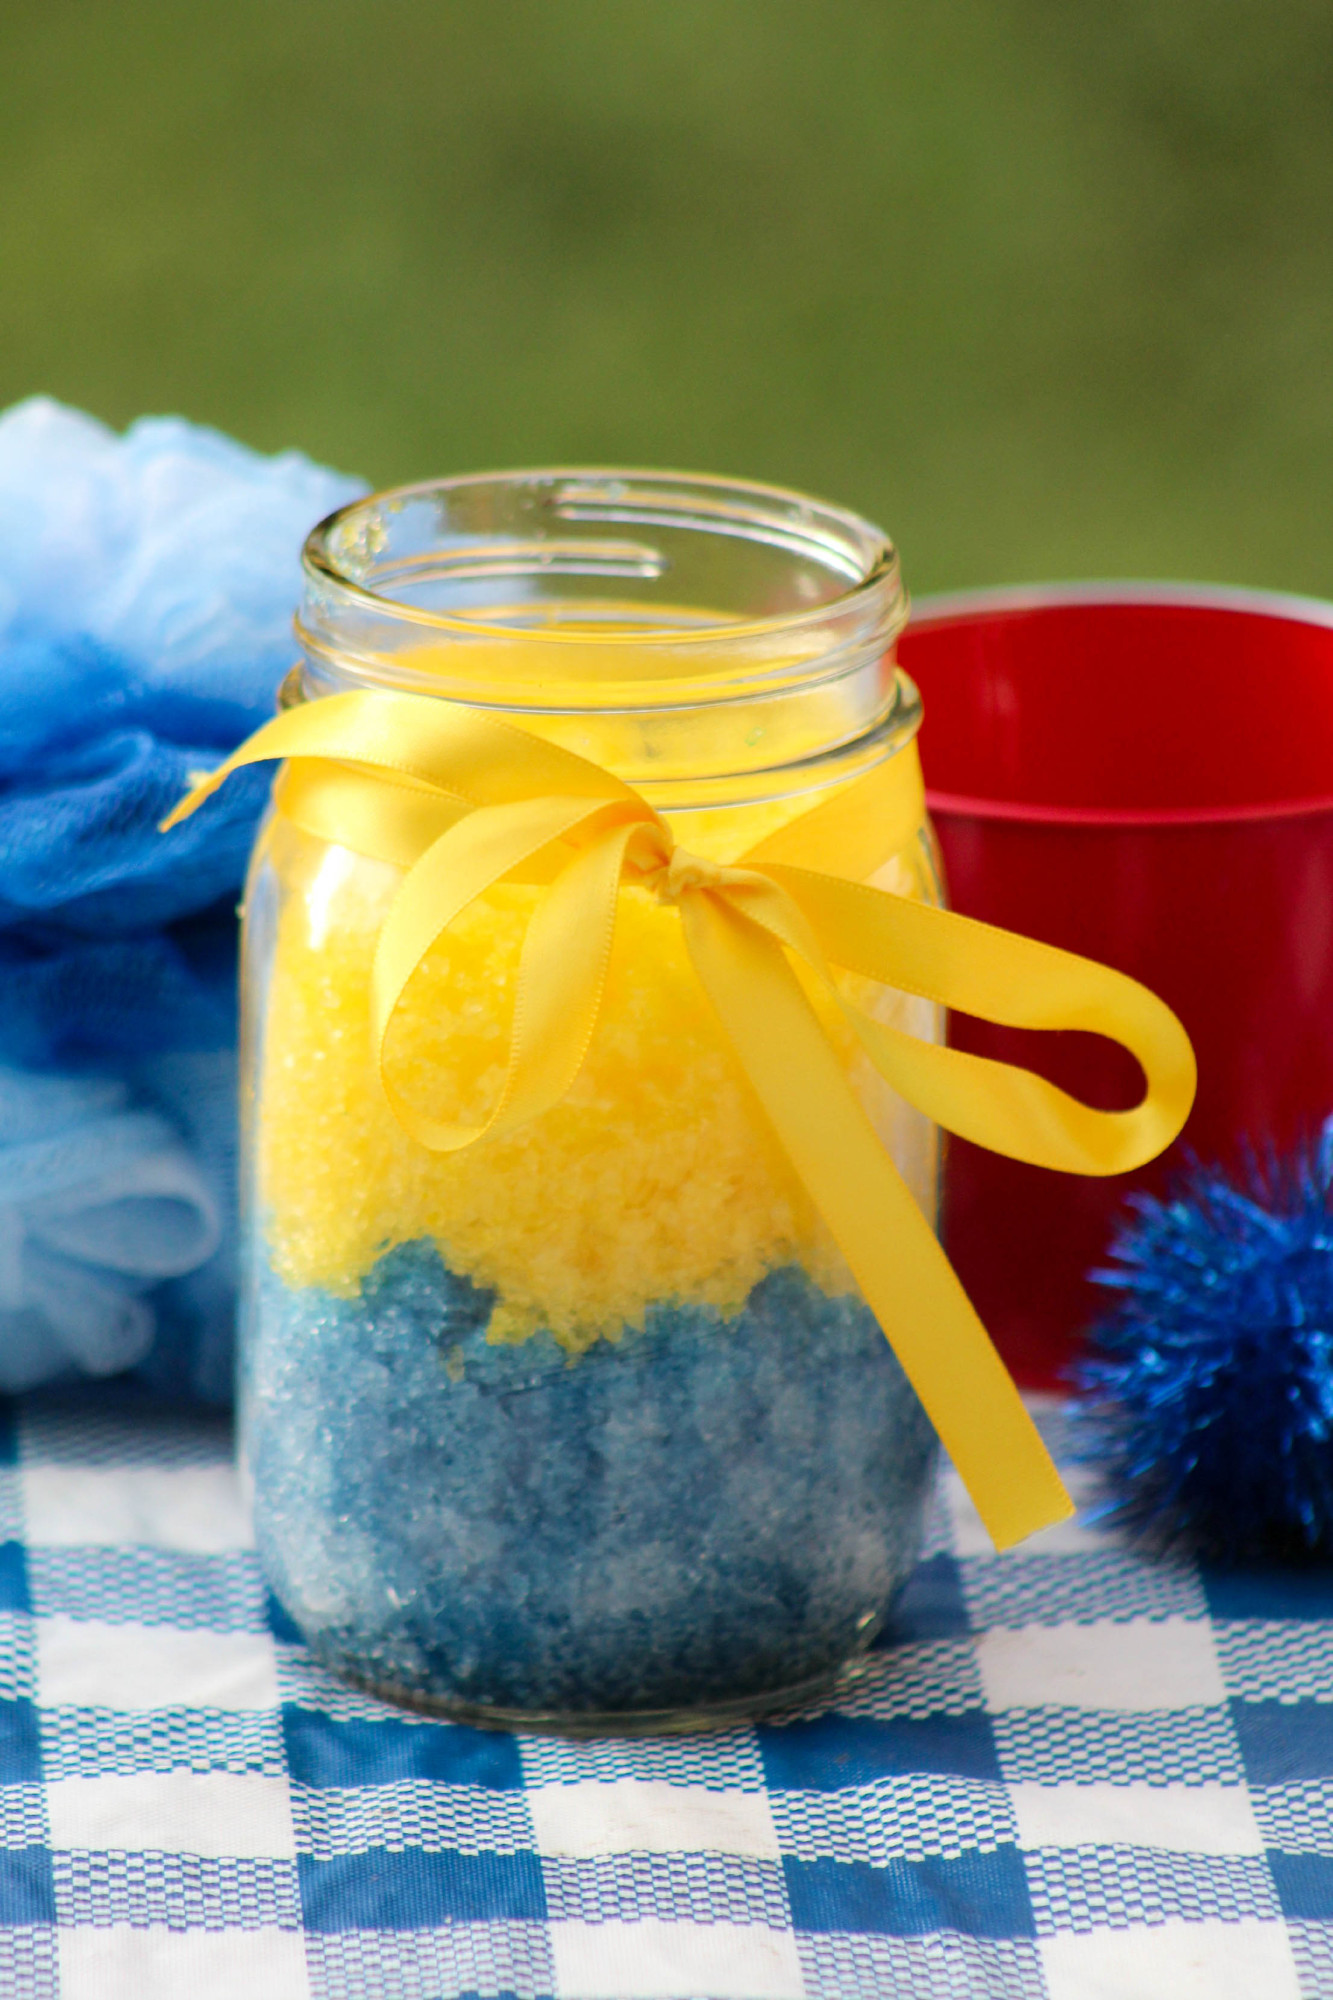 Perk up your summer beauty routine with this adorable DIY Minion Scrub inspired by the movie. This hydrating scrub is cheap to make and makes a great gift!